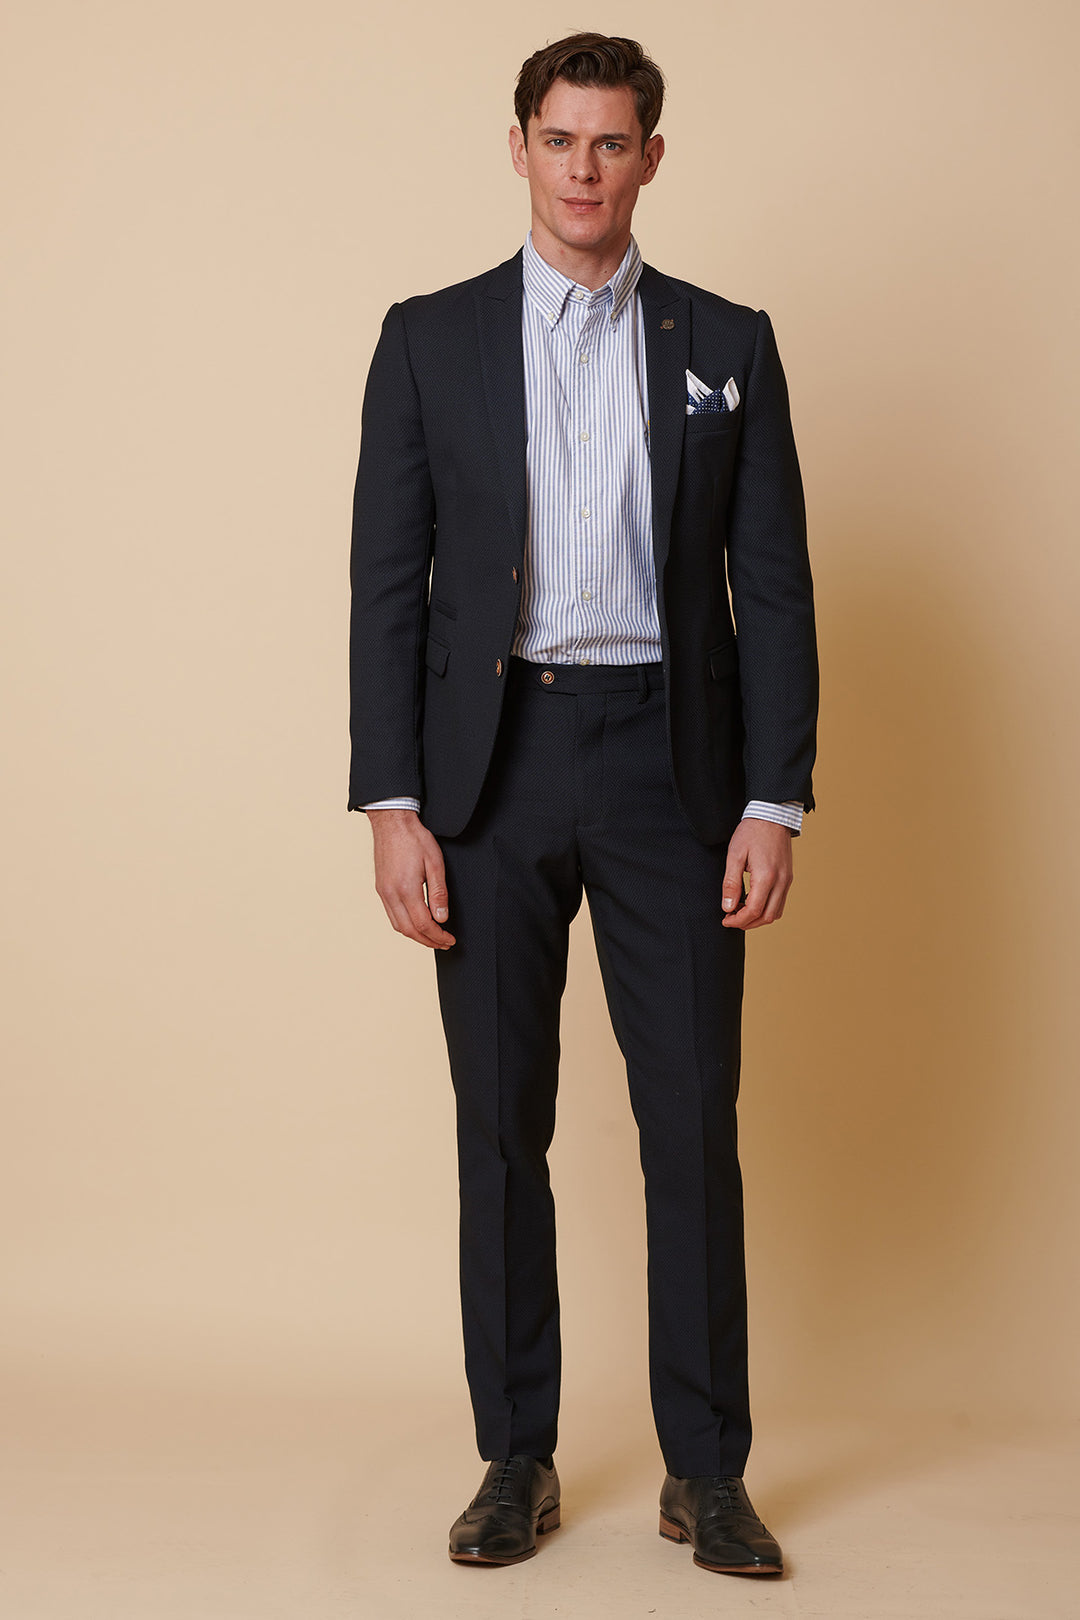 MAX - Navy Blue Two Piece Suit